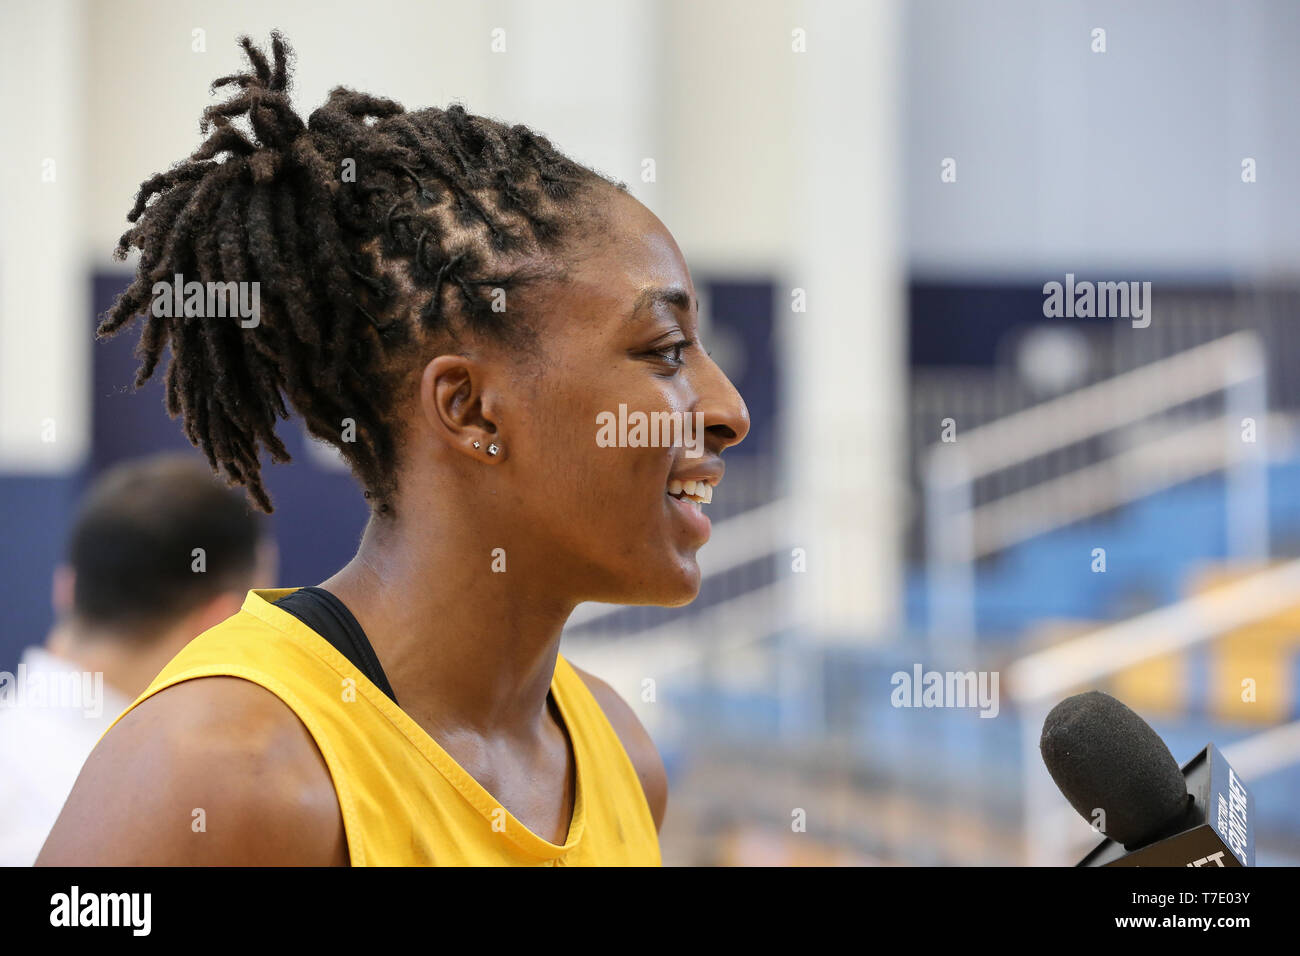 WNBA 2019: Nneka Ogwumike during the Los Angeles Sparks day 2 of training camp at LA Southwest College in Los Angeles, Ca on May 6, 2019. (Photo by Jevone Moore) Stock Photo